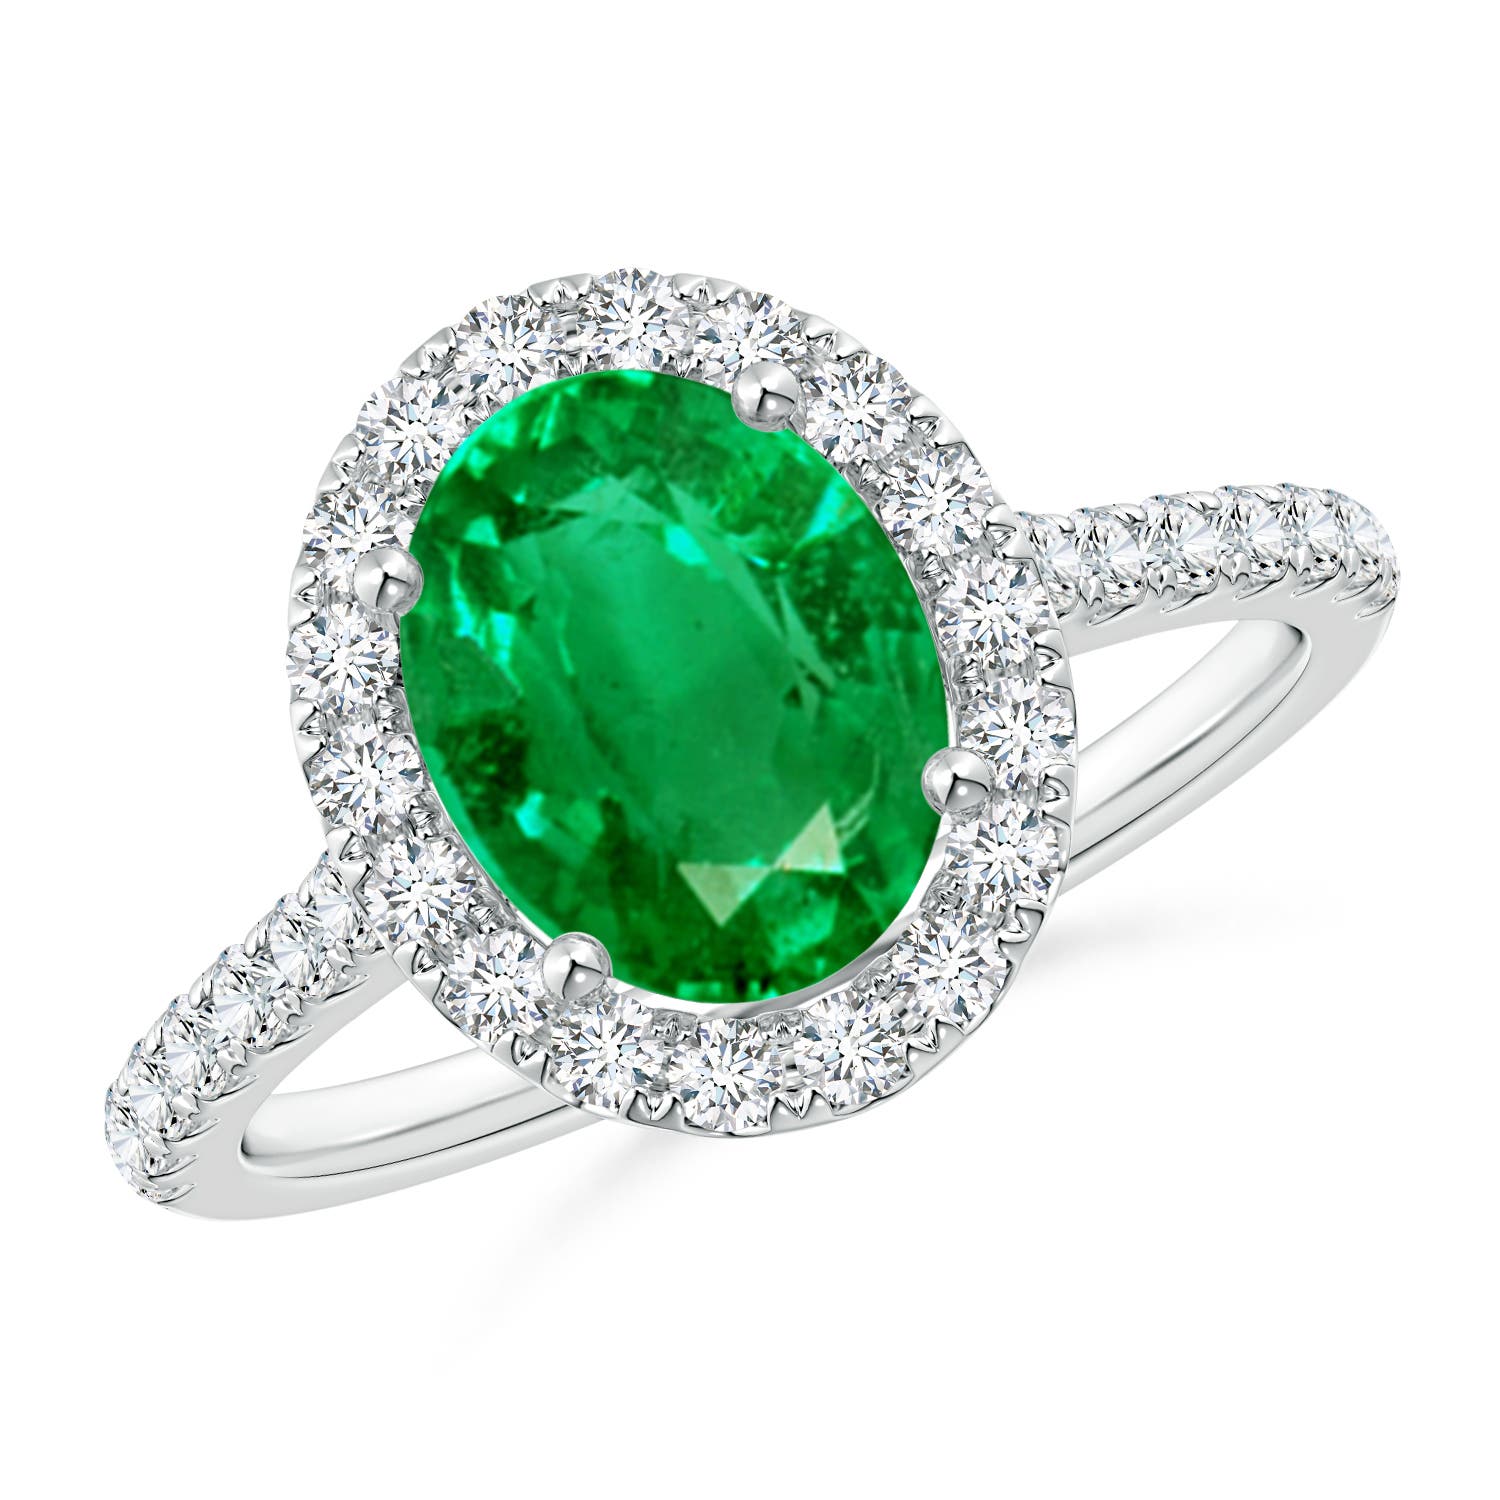 Oval Emerald Halo Ring with Diamond Accents | Angara